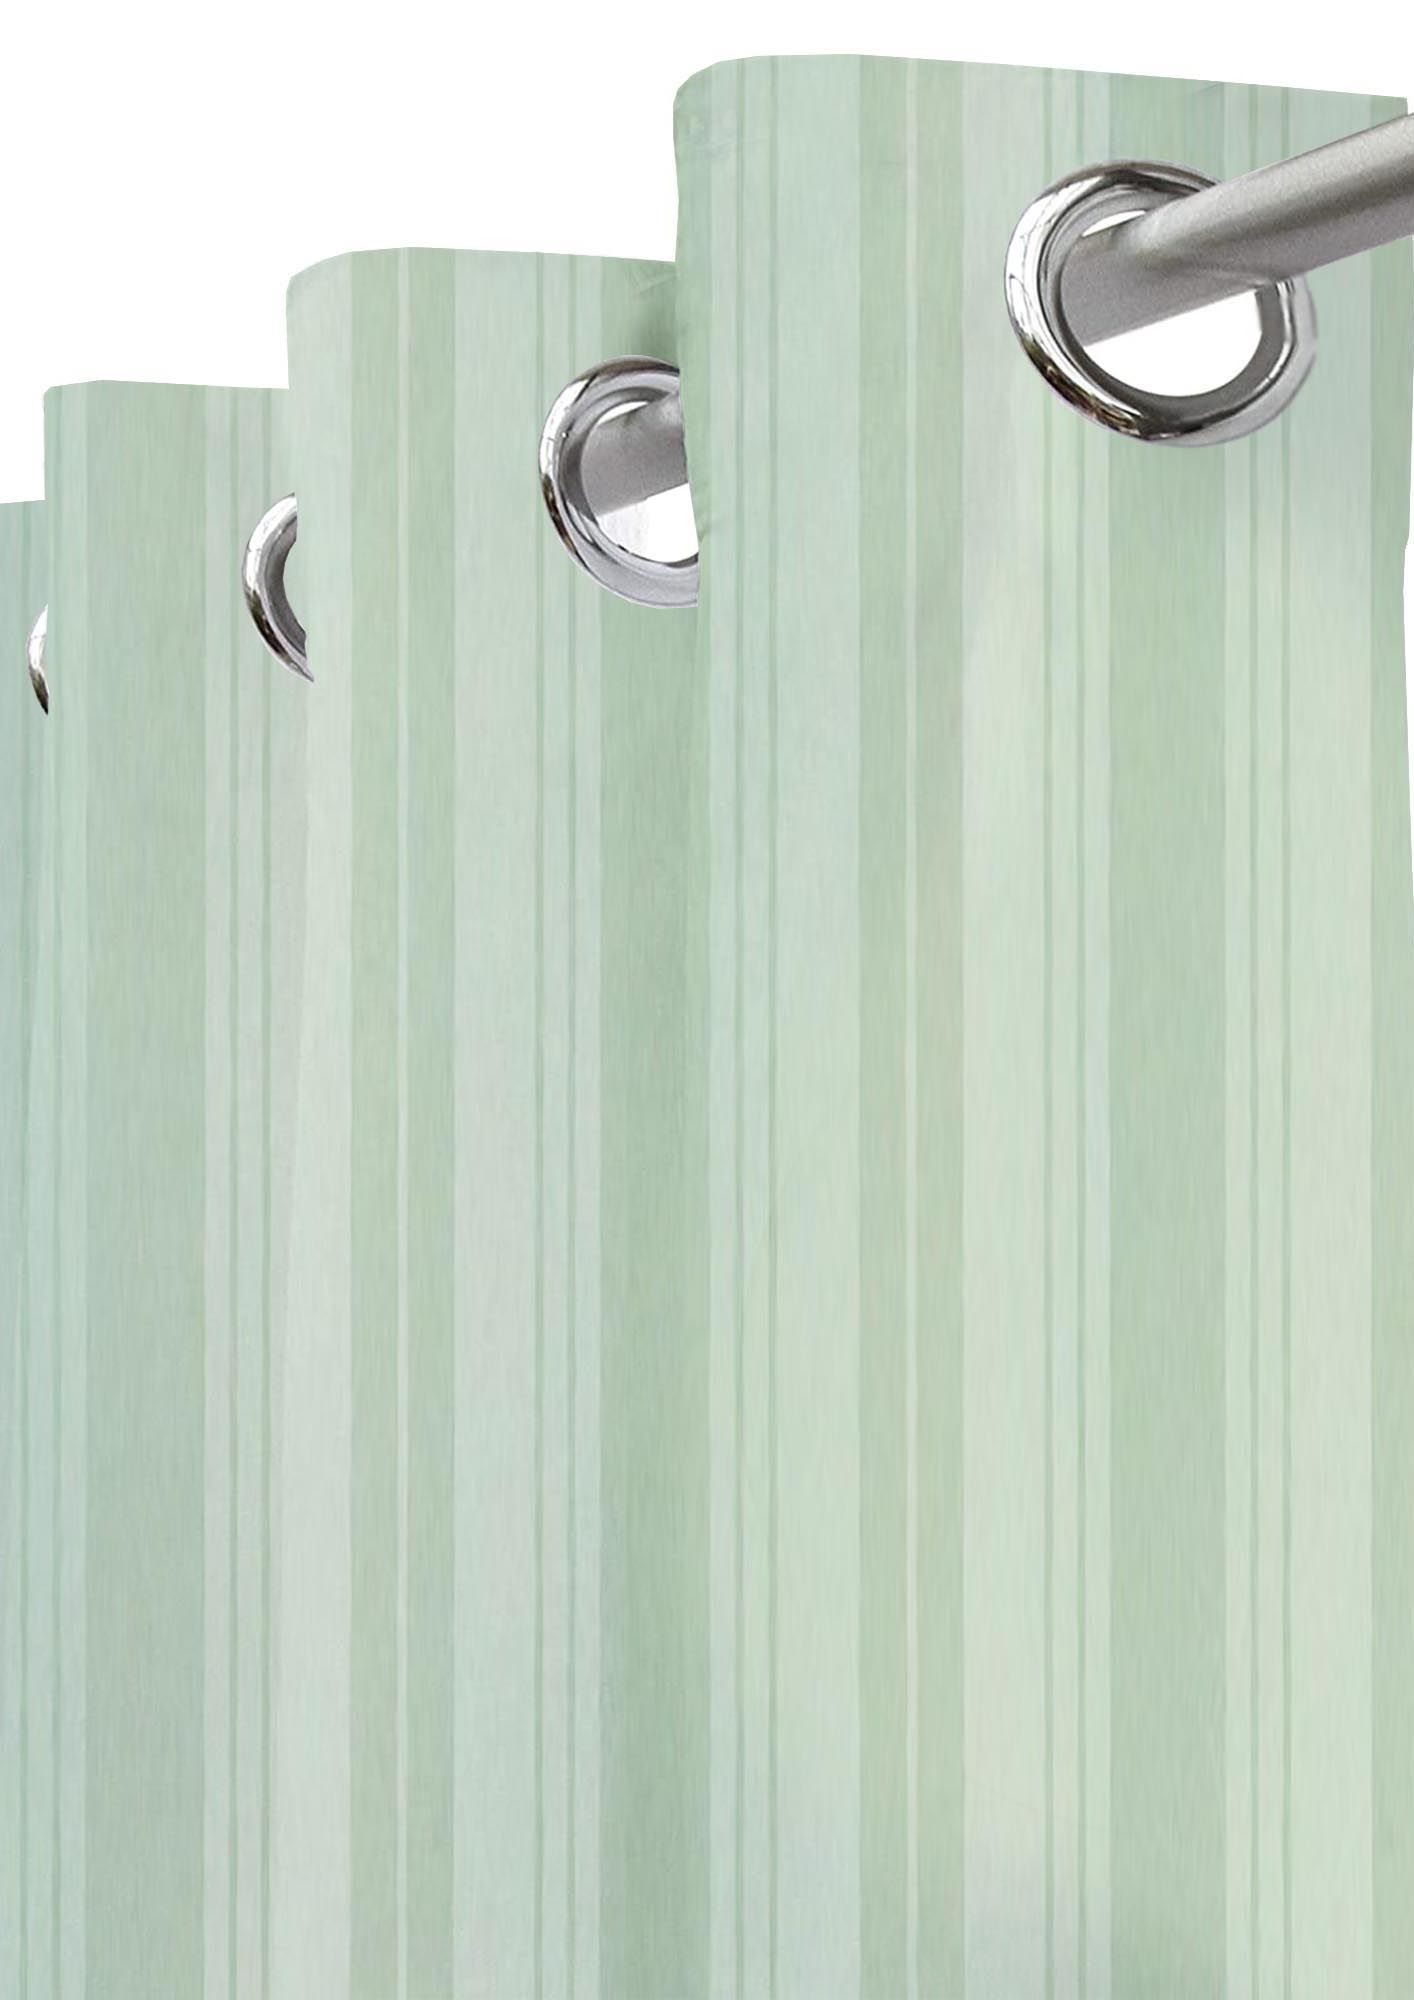 Buy Lushomes Bathroom Shower Curtain with 12 Hooks and 12 Eyelets, Stripe  Desginer Bathtub Curtain, Non-PVC, Water-repellent bathroom Accessories,  Light Green, 6 Ft H x 6.5 FT W (72 Inch x 80